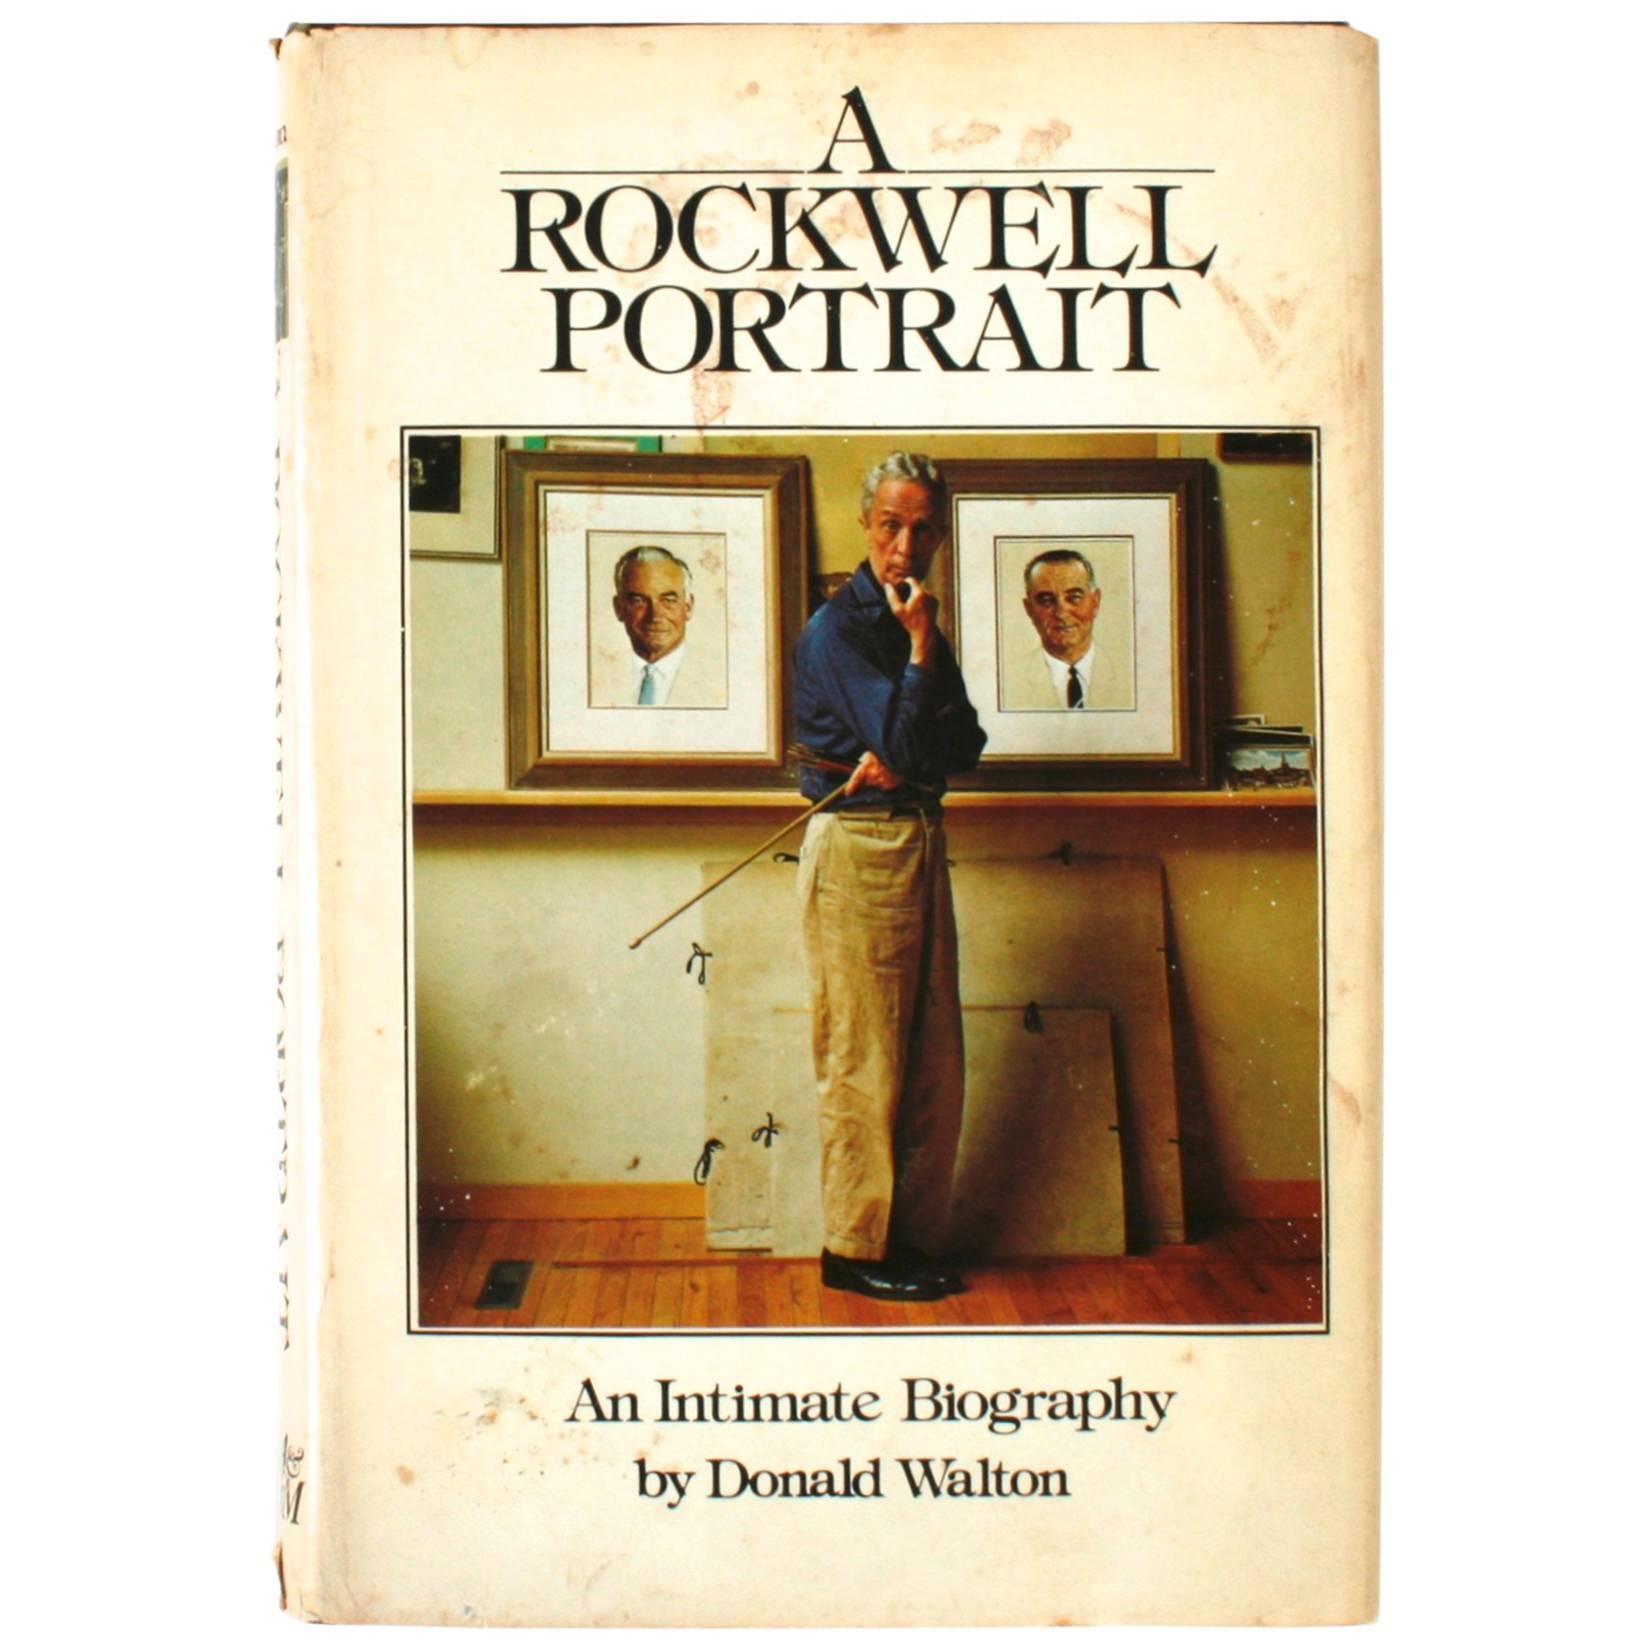 "A Rockwell Portrait, An Intimate Biography by Donald Walton", First Edition